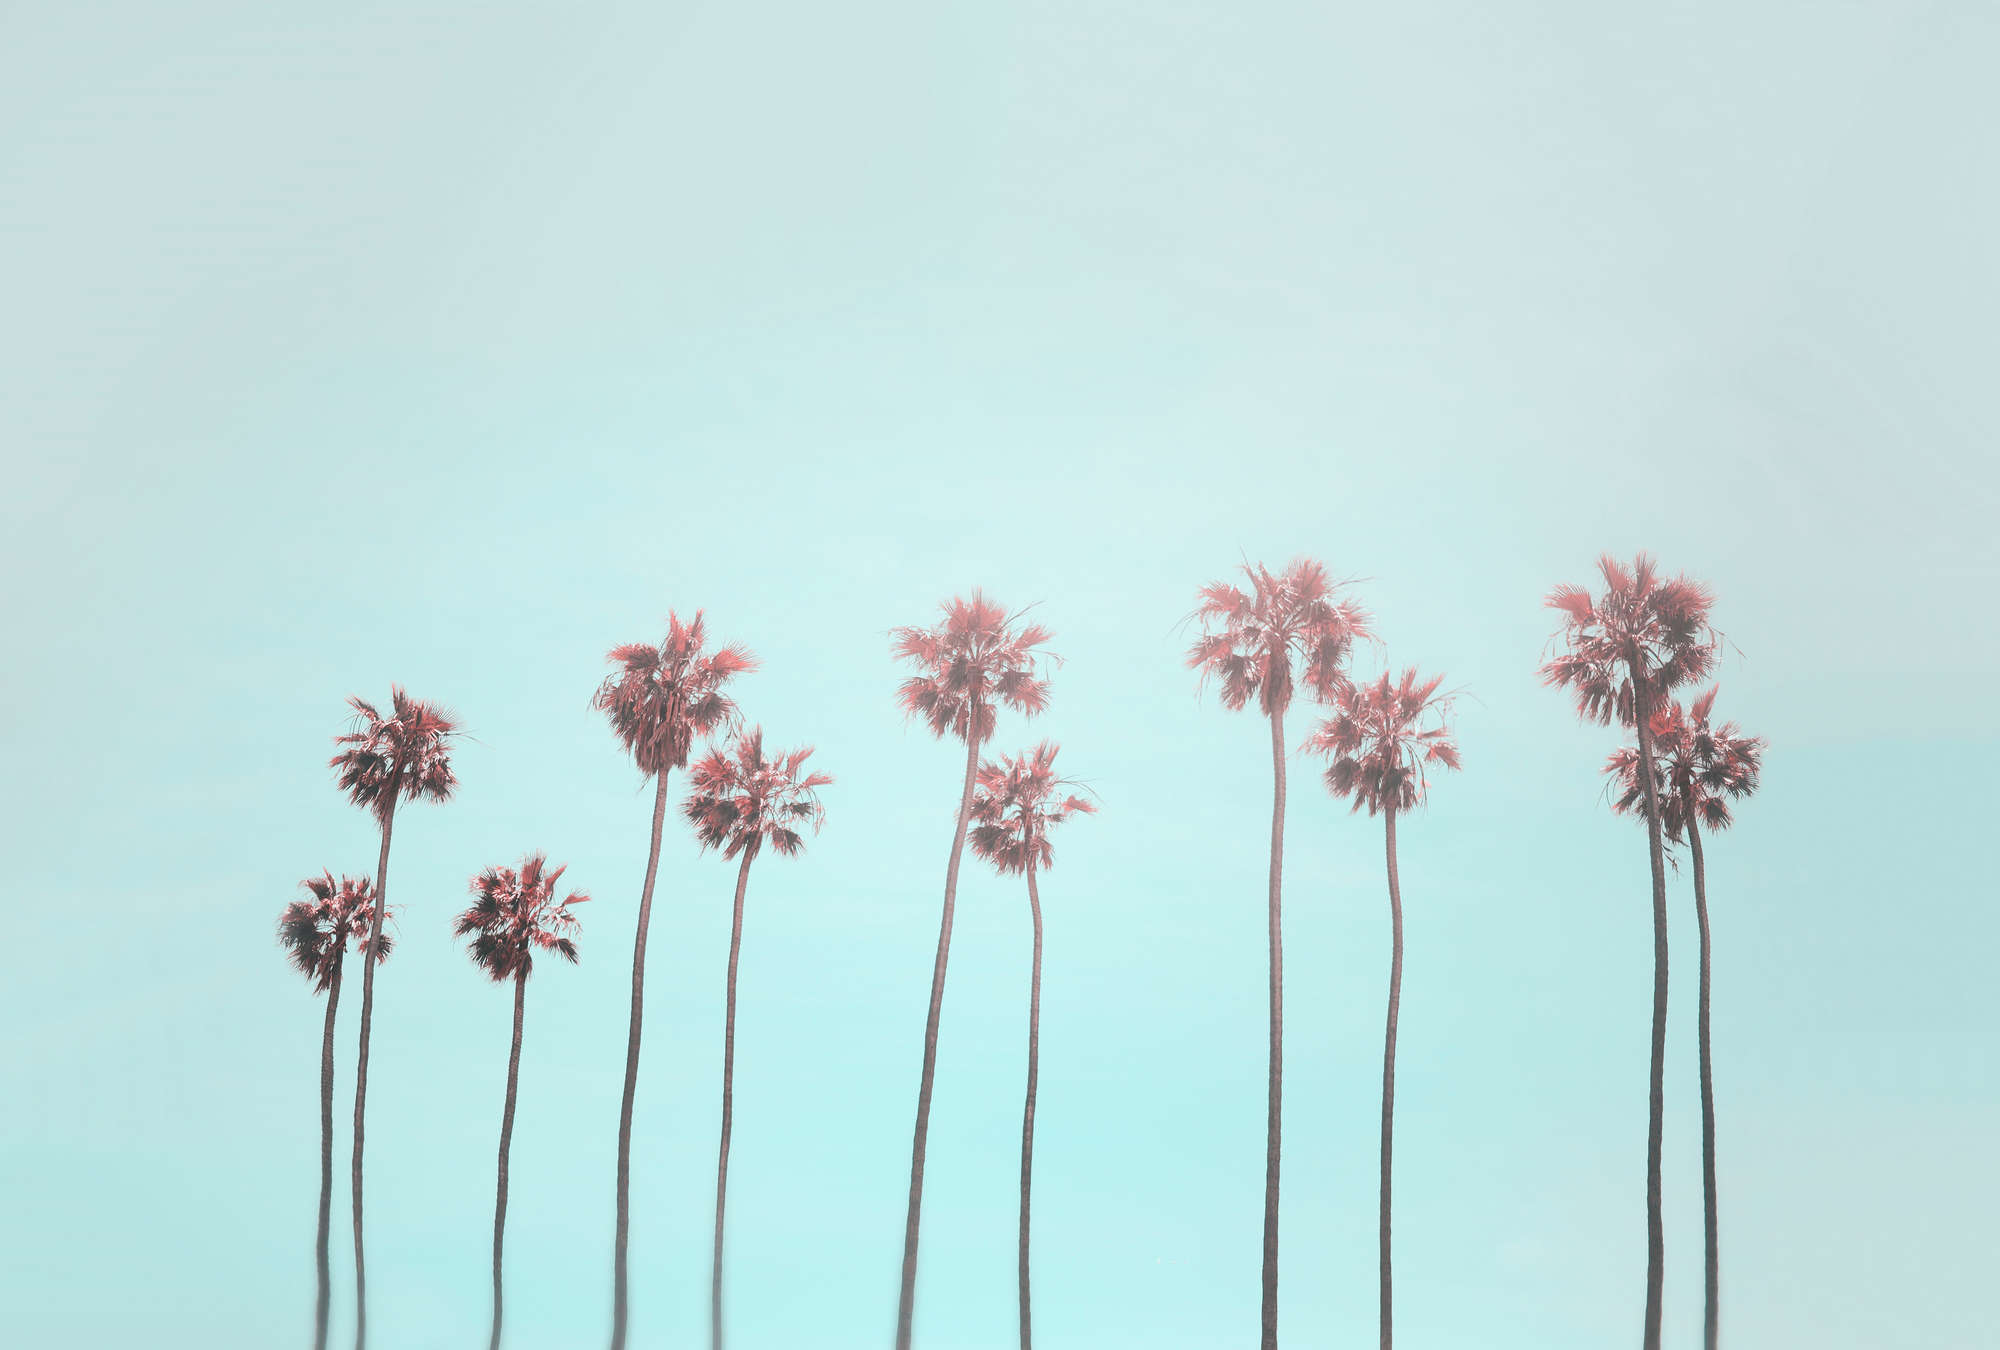             Photo wallpaper palm trees & sky for beach feeling in turquoise & pink
        